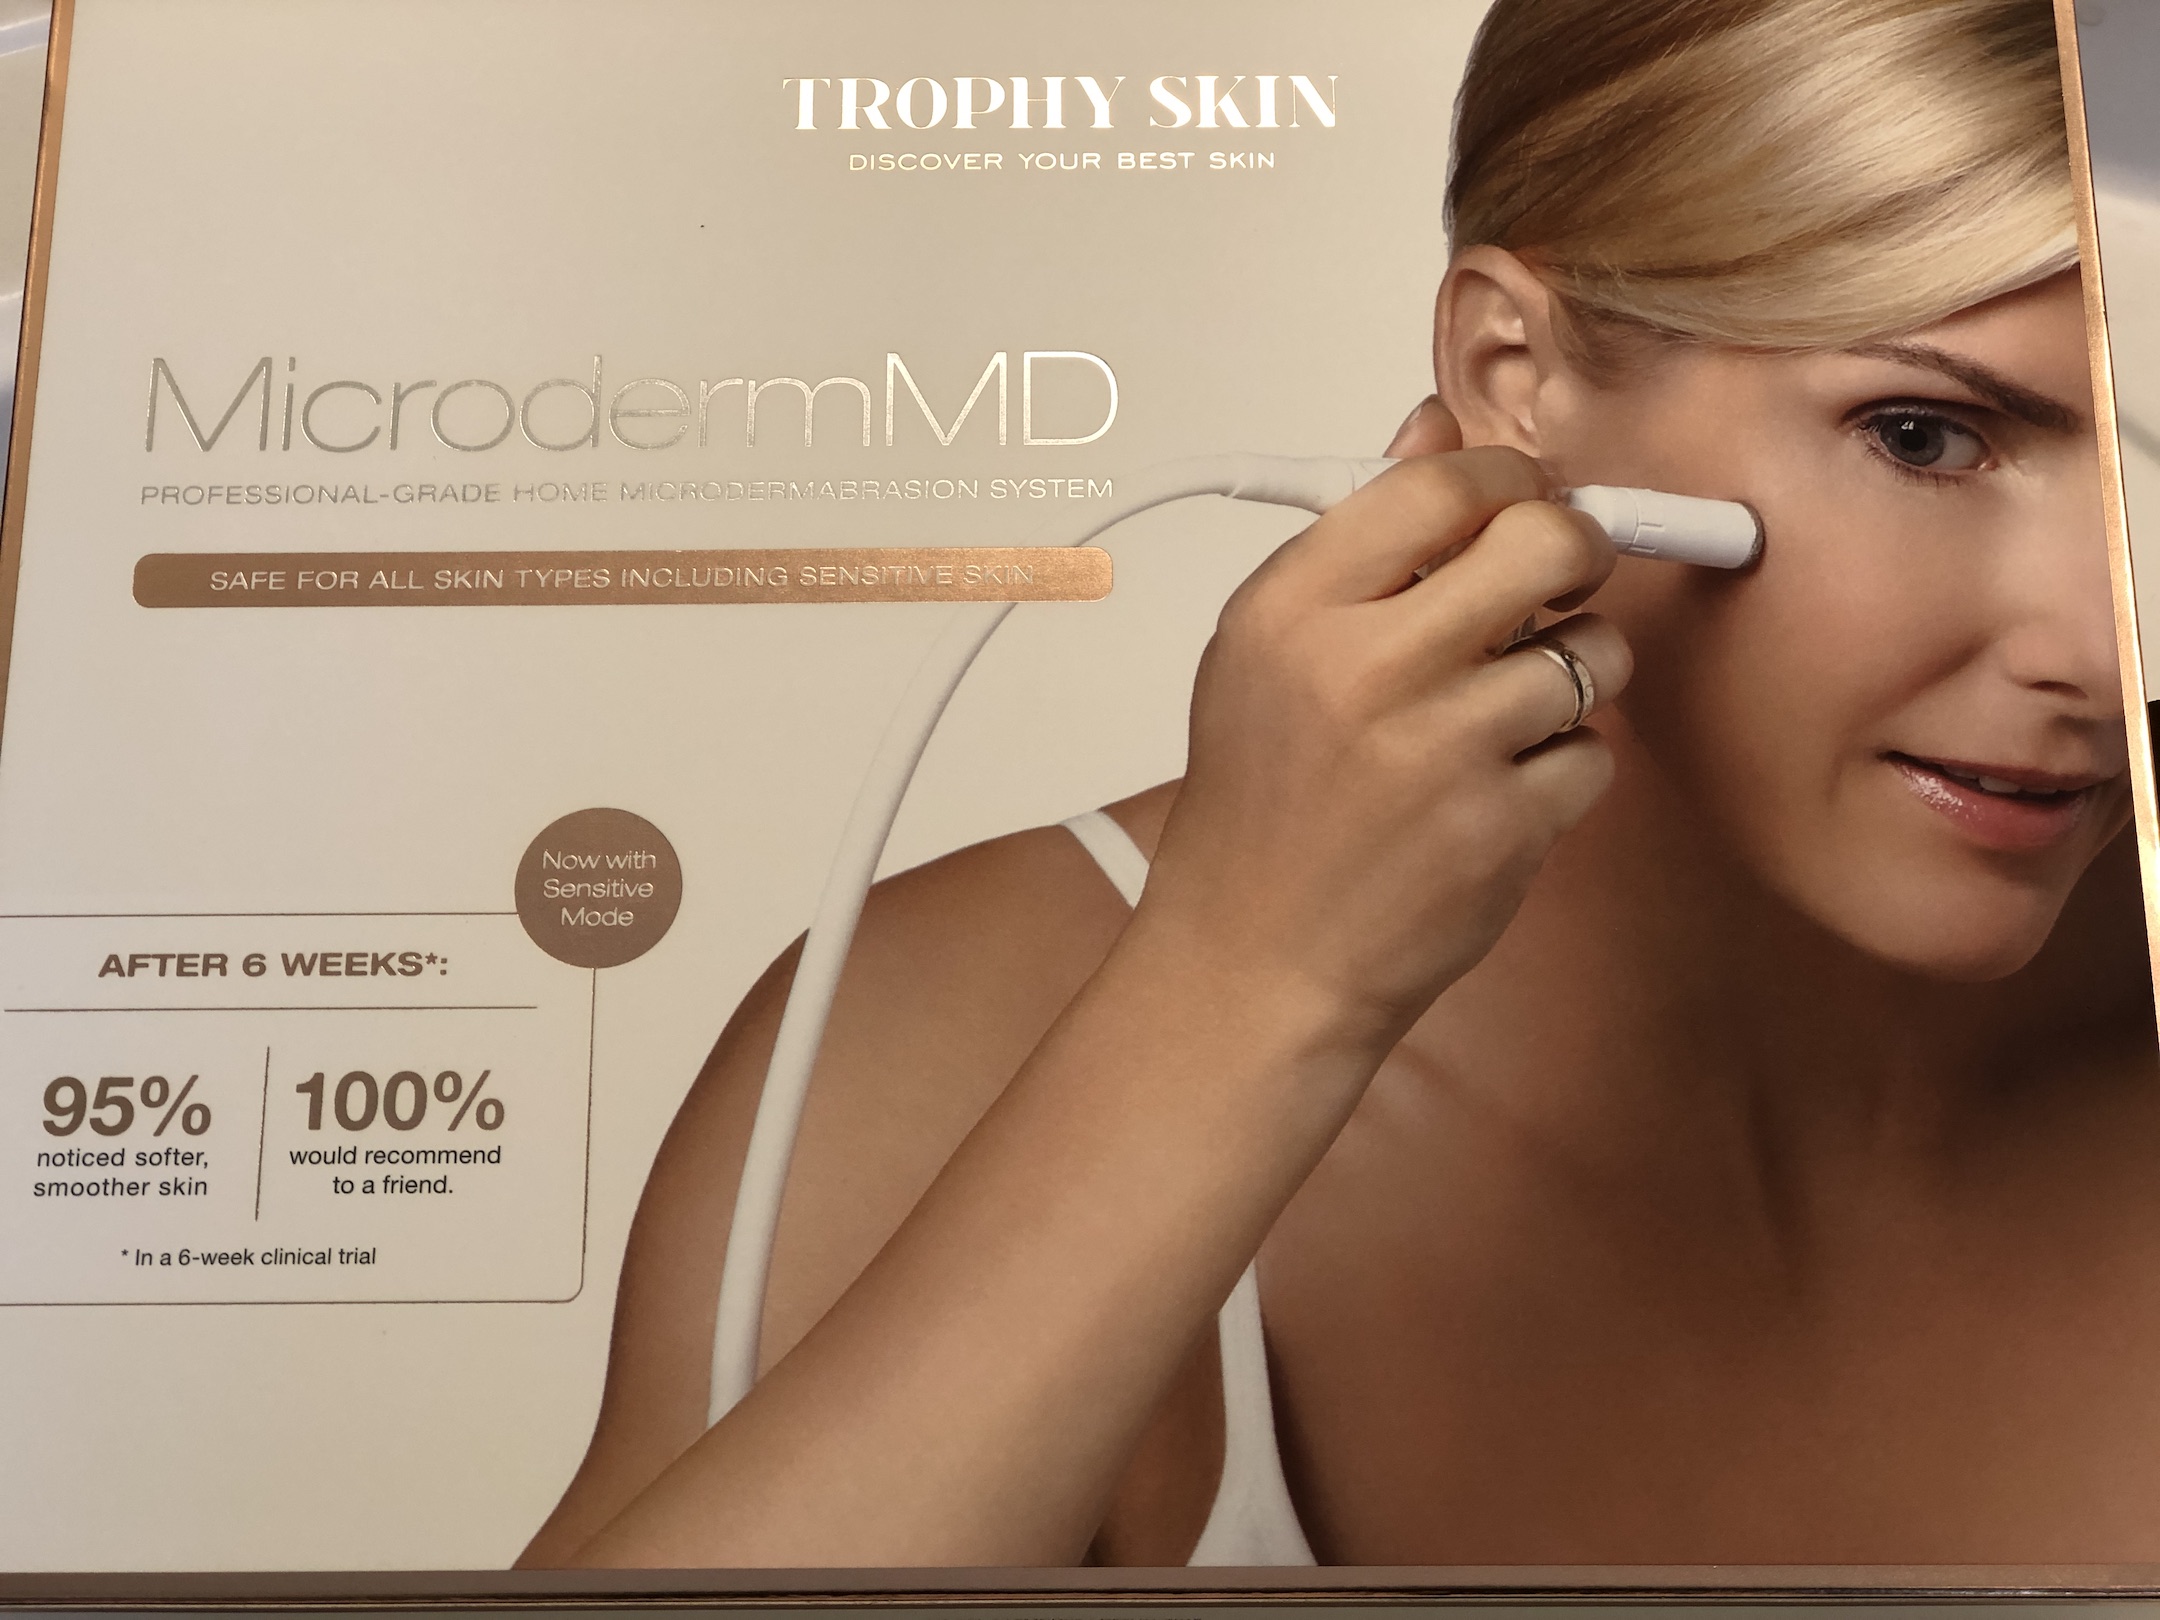 Why I LOVE the Microderm MD by Trophy Skin and How To Use It